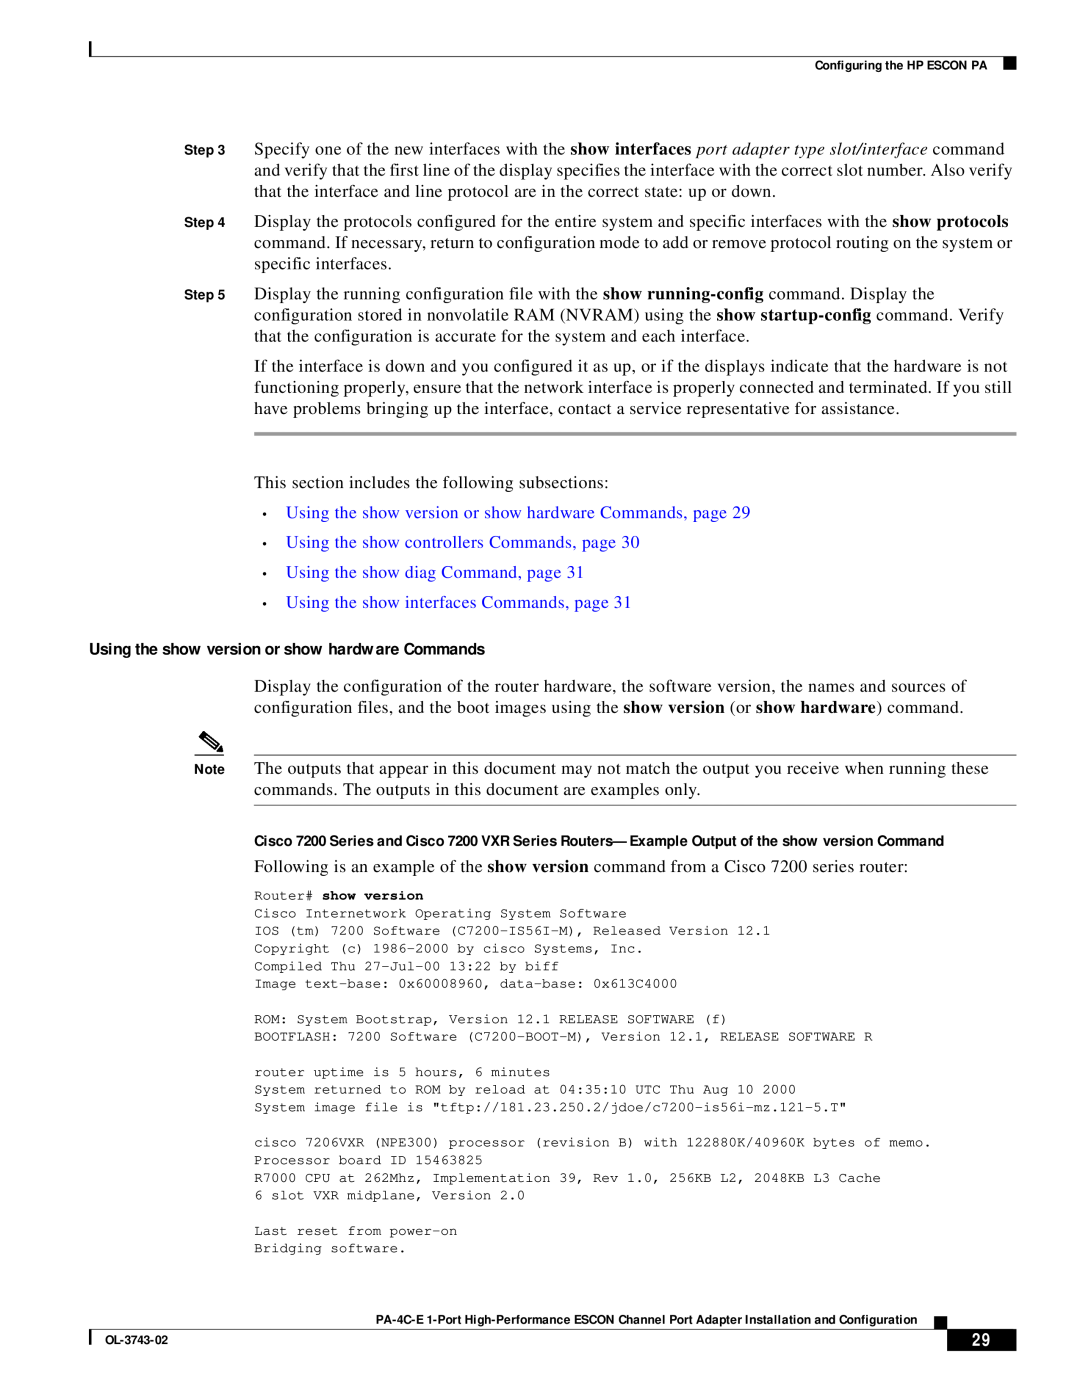 Cisco Systems PA-4C-E 1 manual Using the show version or show hardware Commands, Using the show controllers Commands, page 